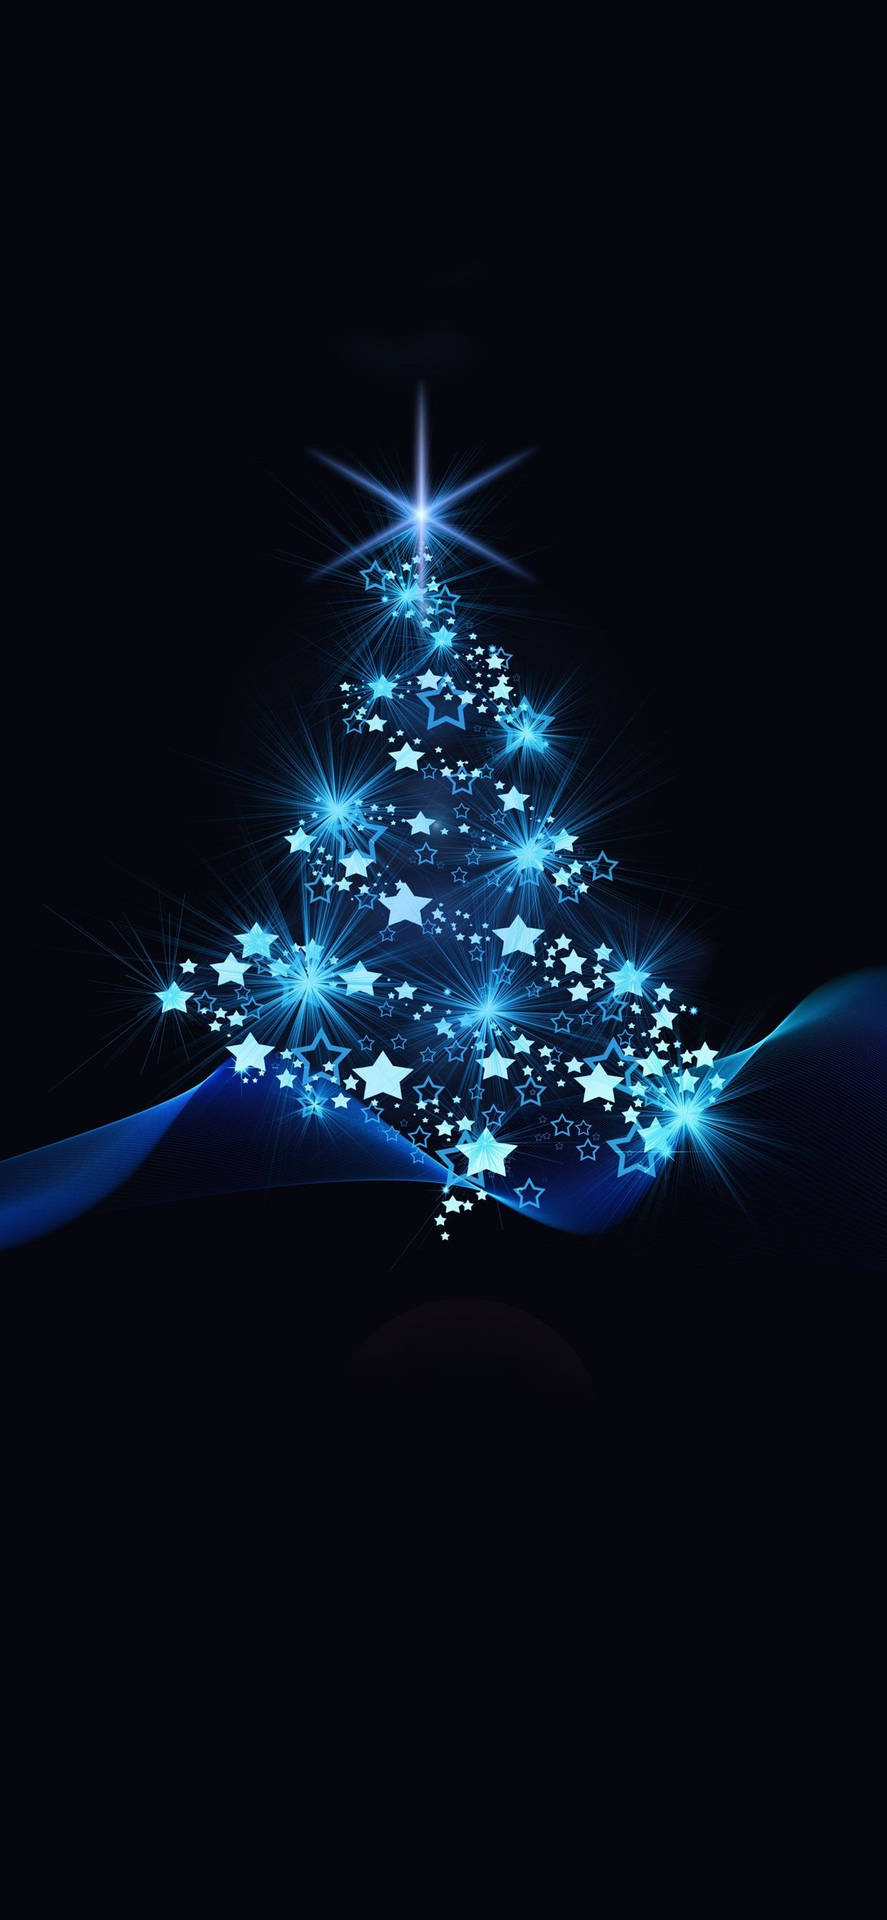 IPhone 11 Pro Max Christmas Flare Wallpaper